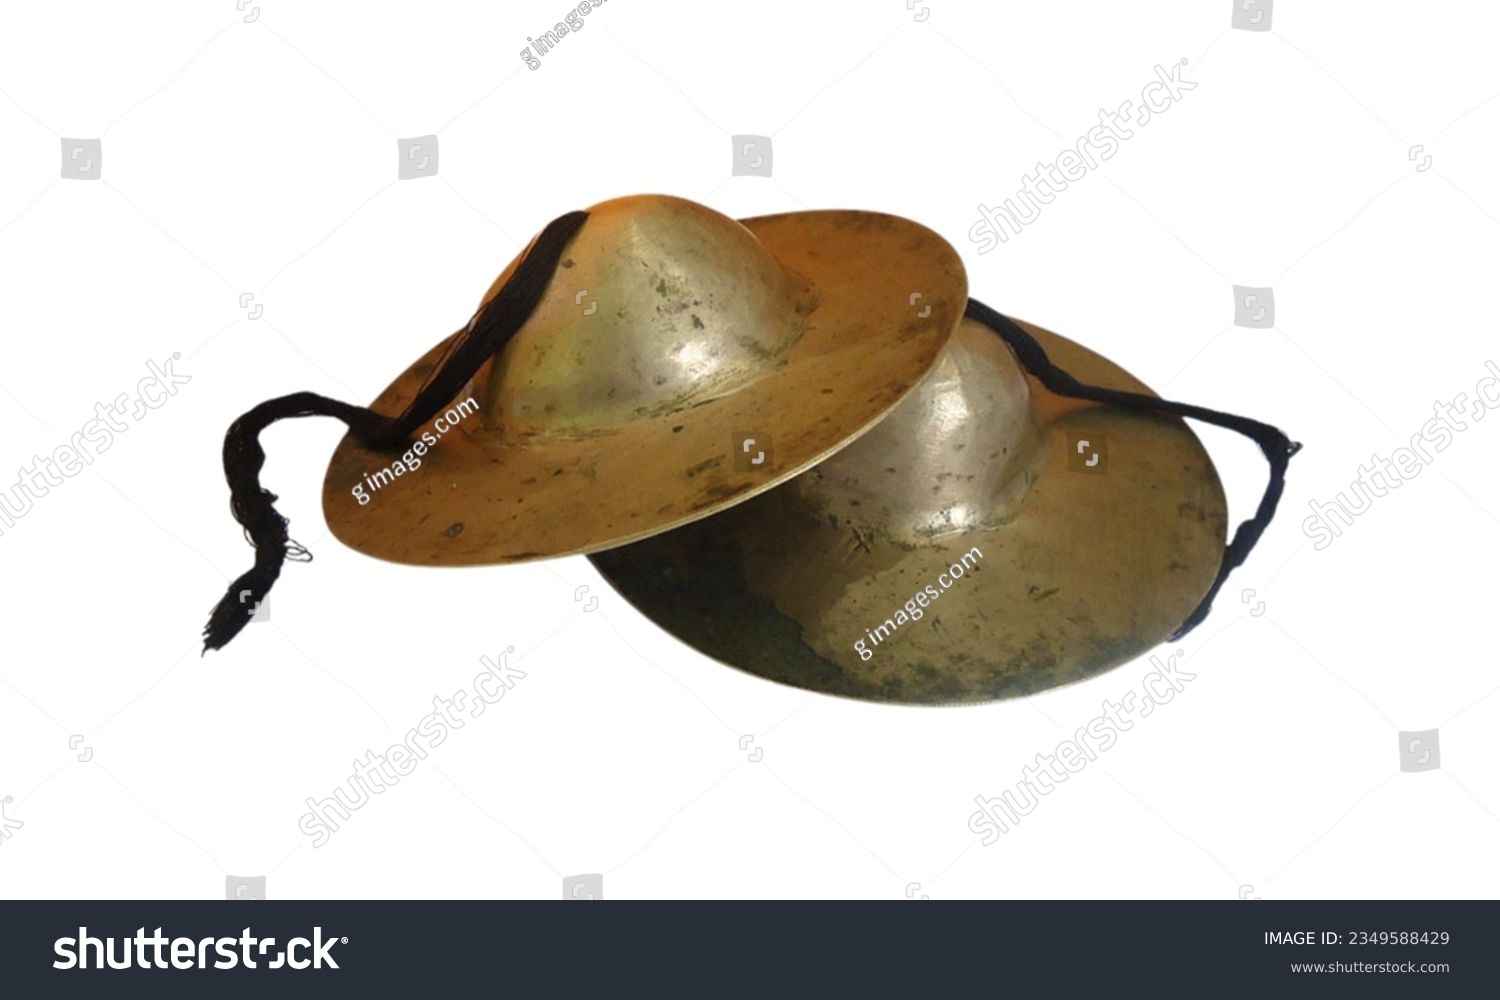 Cymbals: Percussion instruments made of metal alloys, producing crashing and shimmering sounds when struck. #2349588429